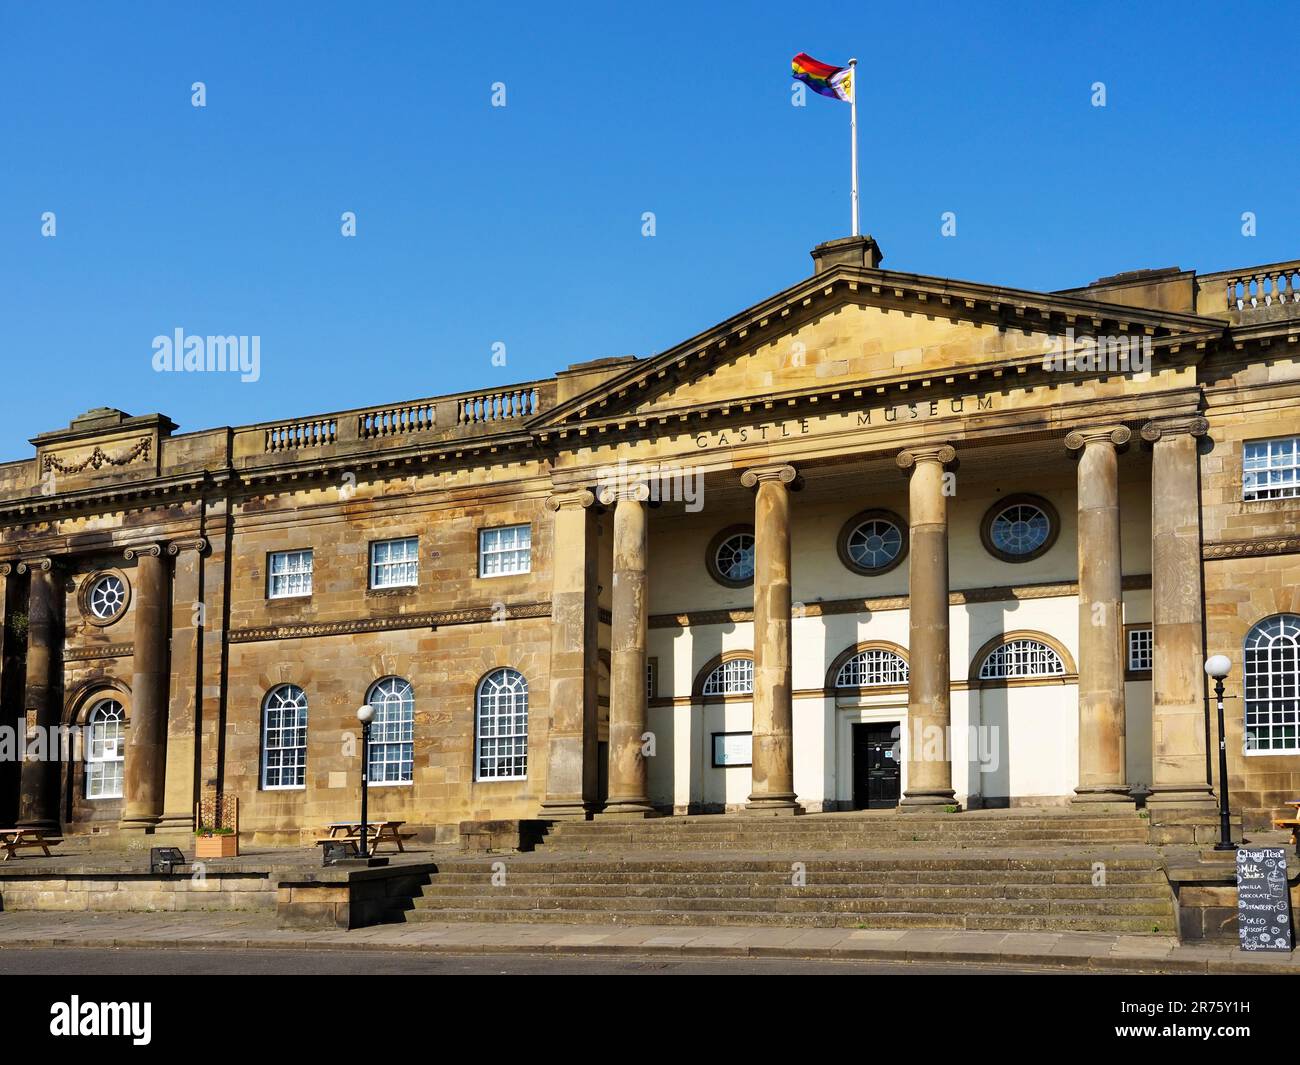 Pride flag flying over the Castle Museum in York Yorkshire England Stock Photo